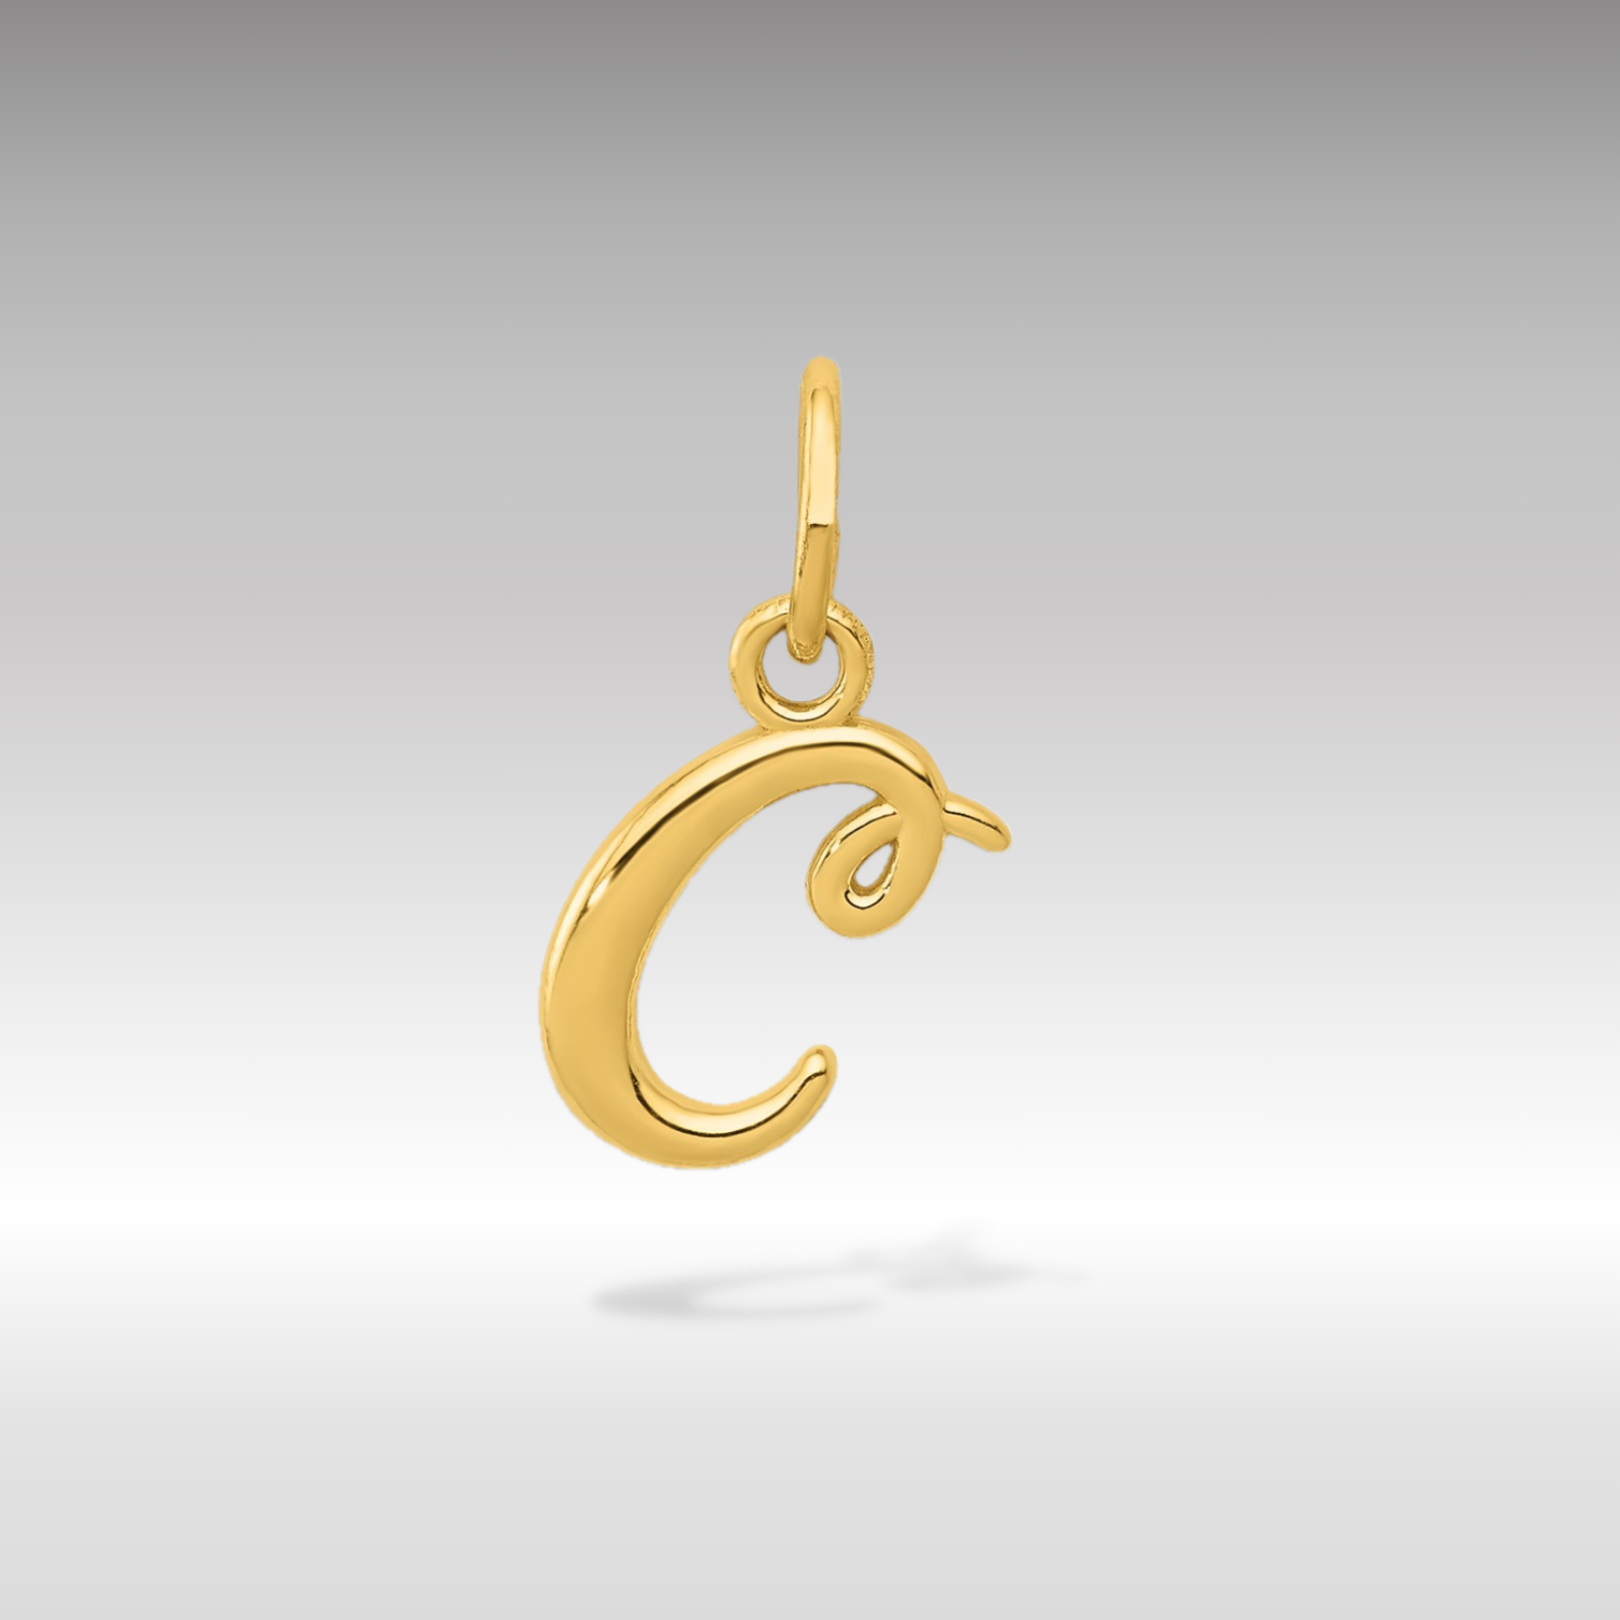 14K Gold Lowercase Initial "c" Pendant - Charlie & Co. Jewelry